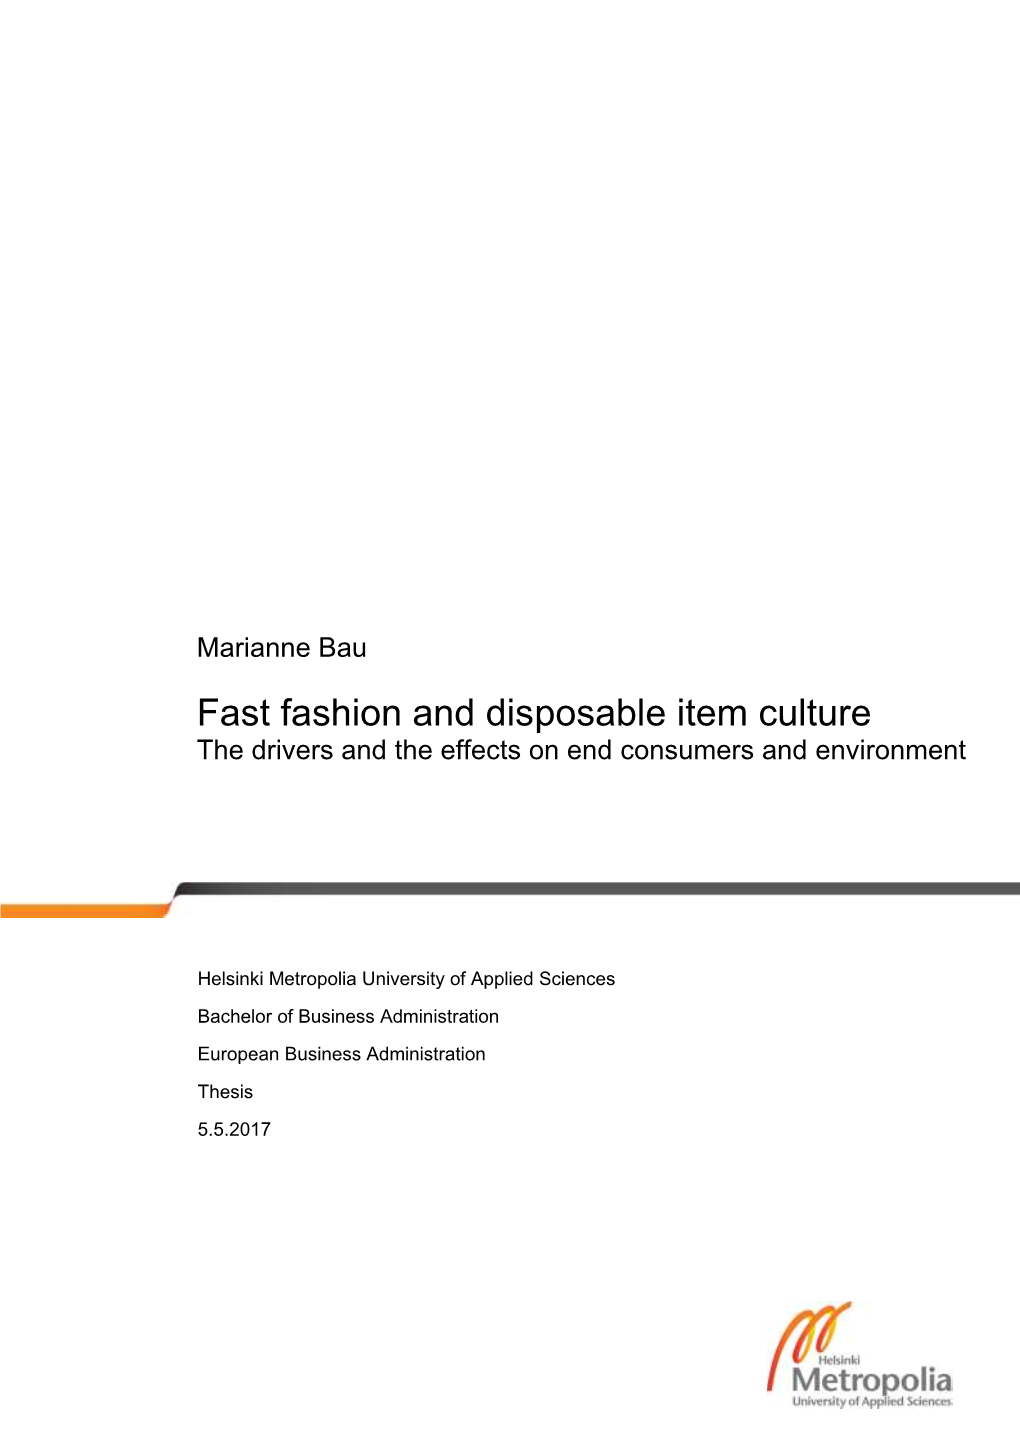 Fast Fashion and Disposable Item Culture the Drivers and the Effects on End Consumers and Environment